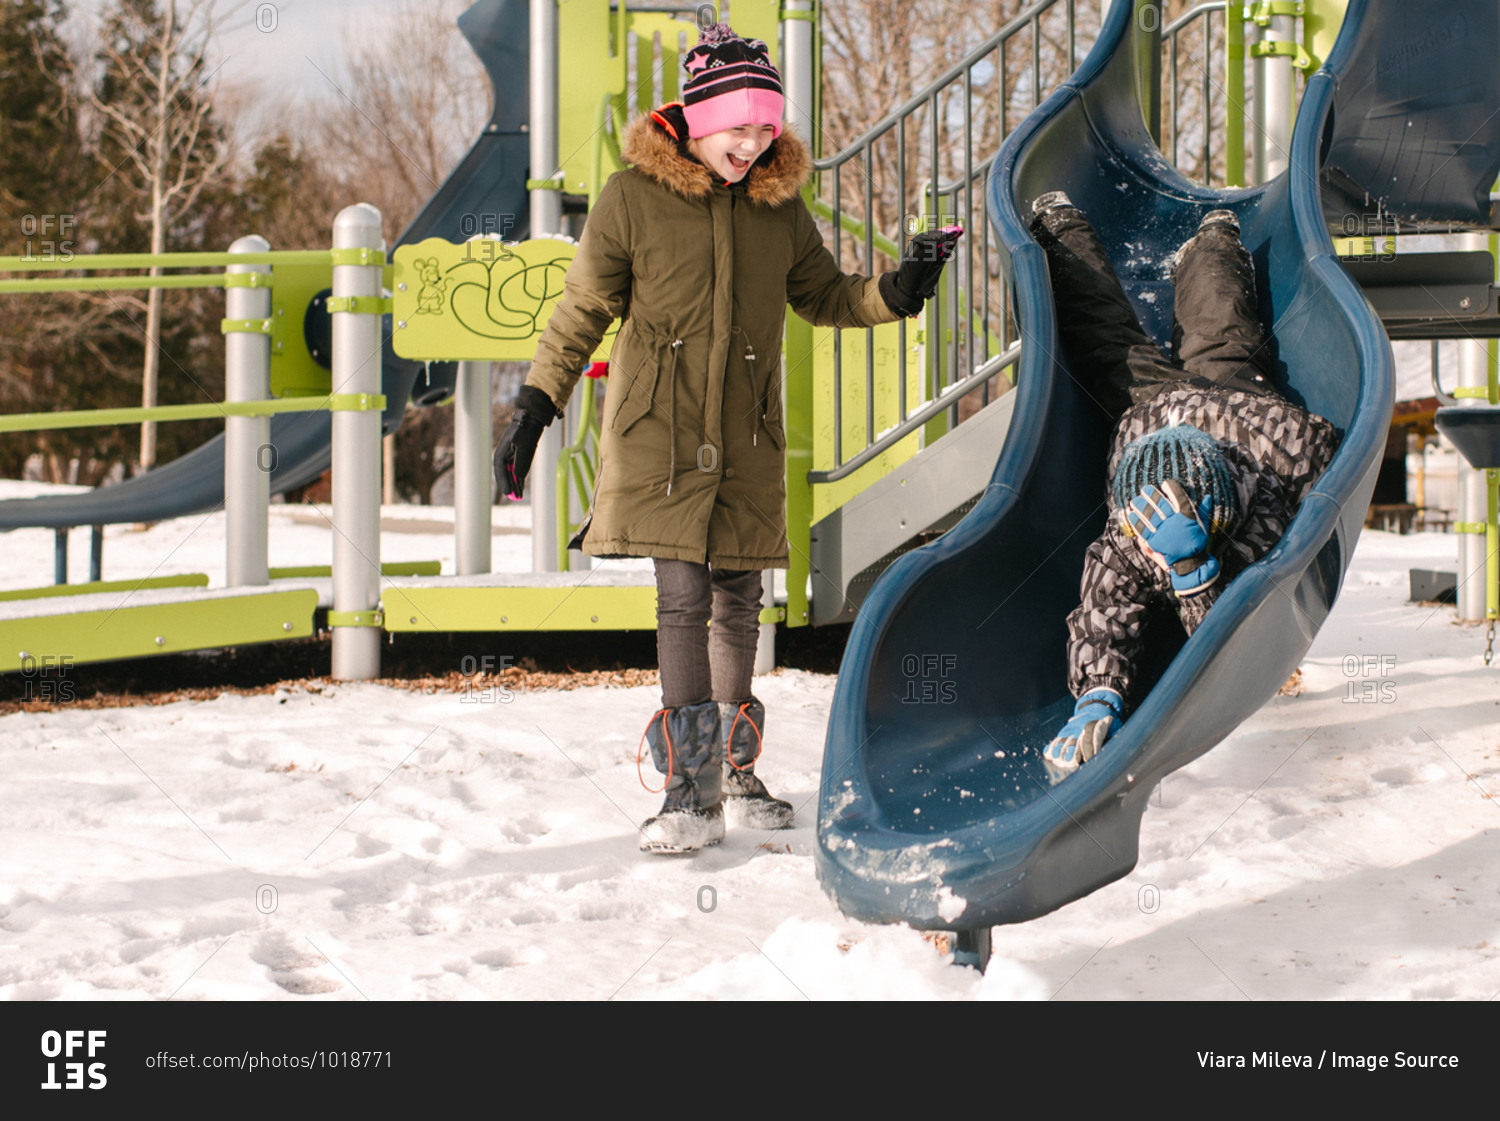 Girl watching brother headfirst on playground slide in snow